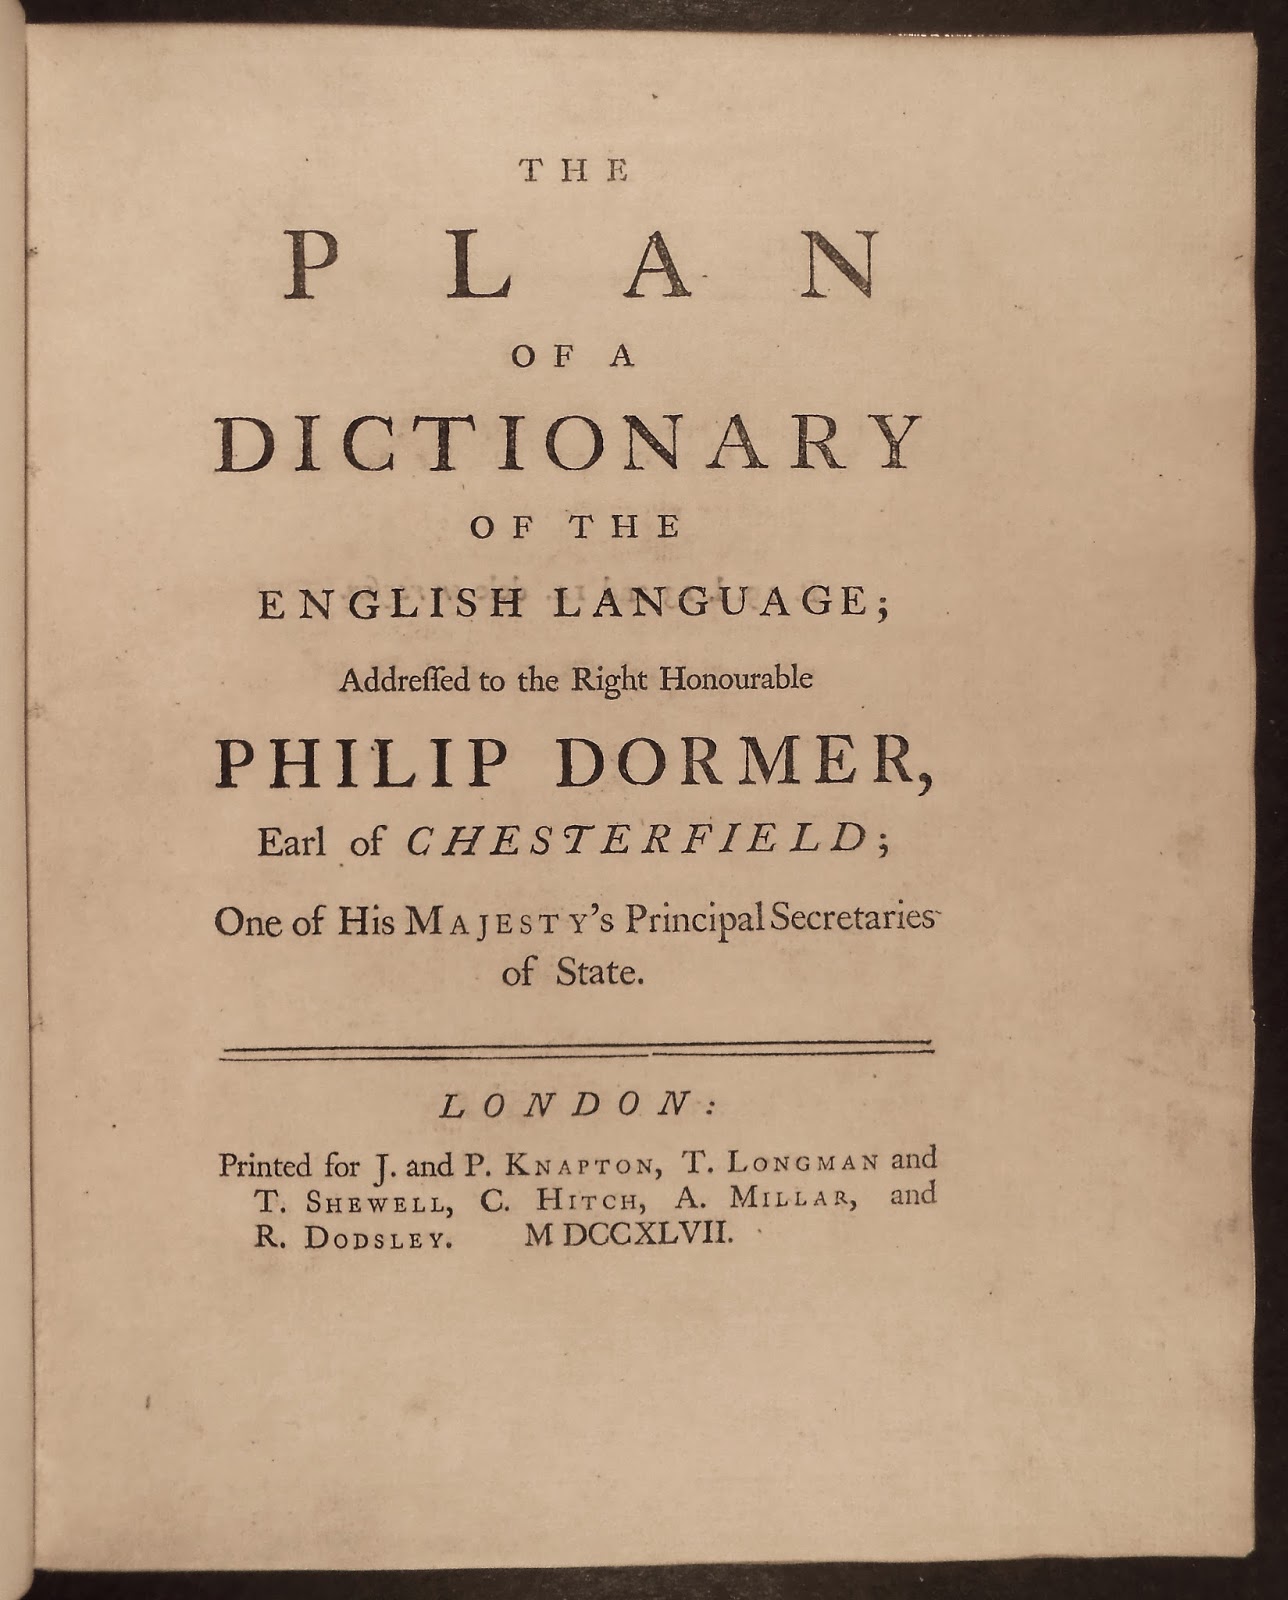 A title page for "The Plan of a Dictionary."